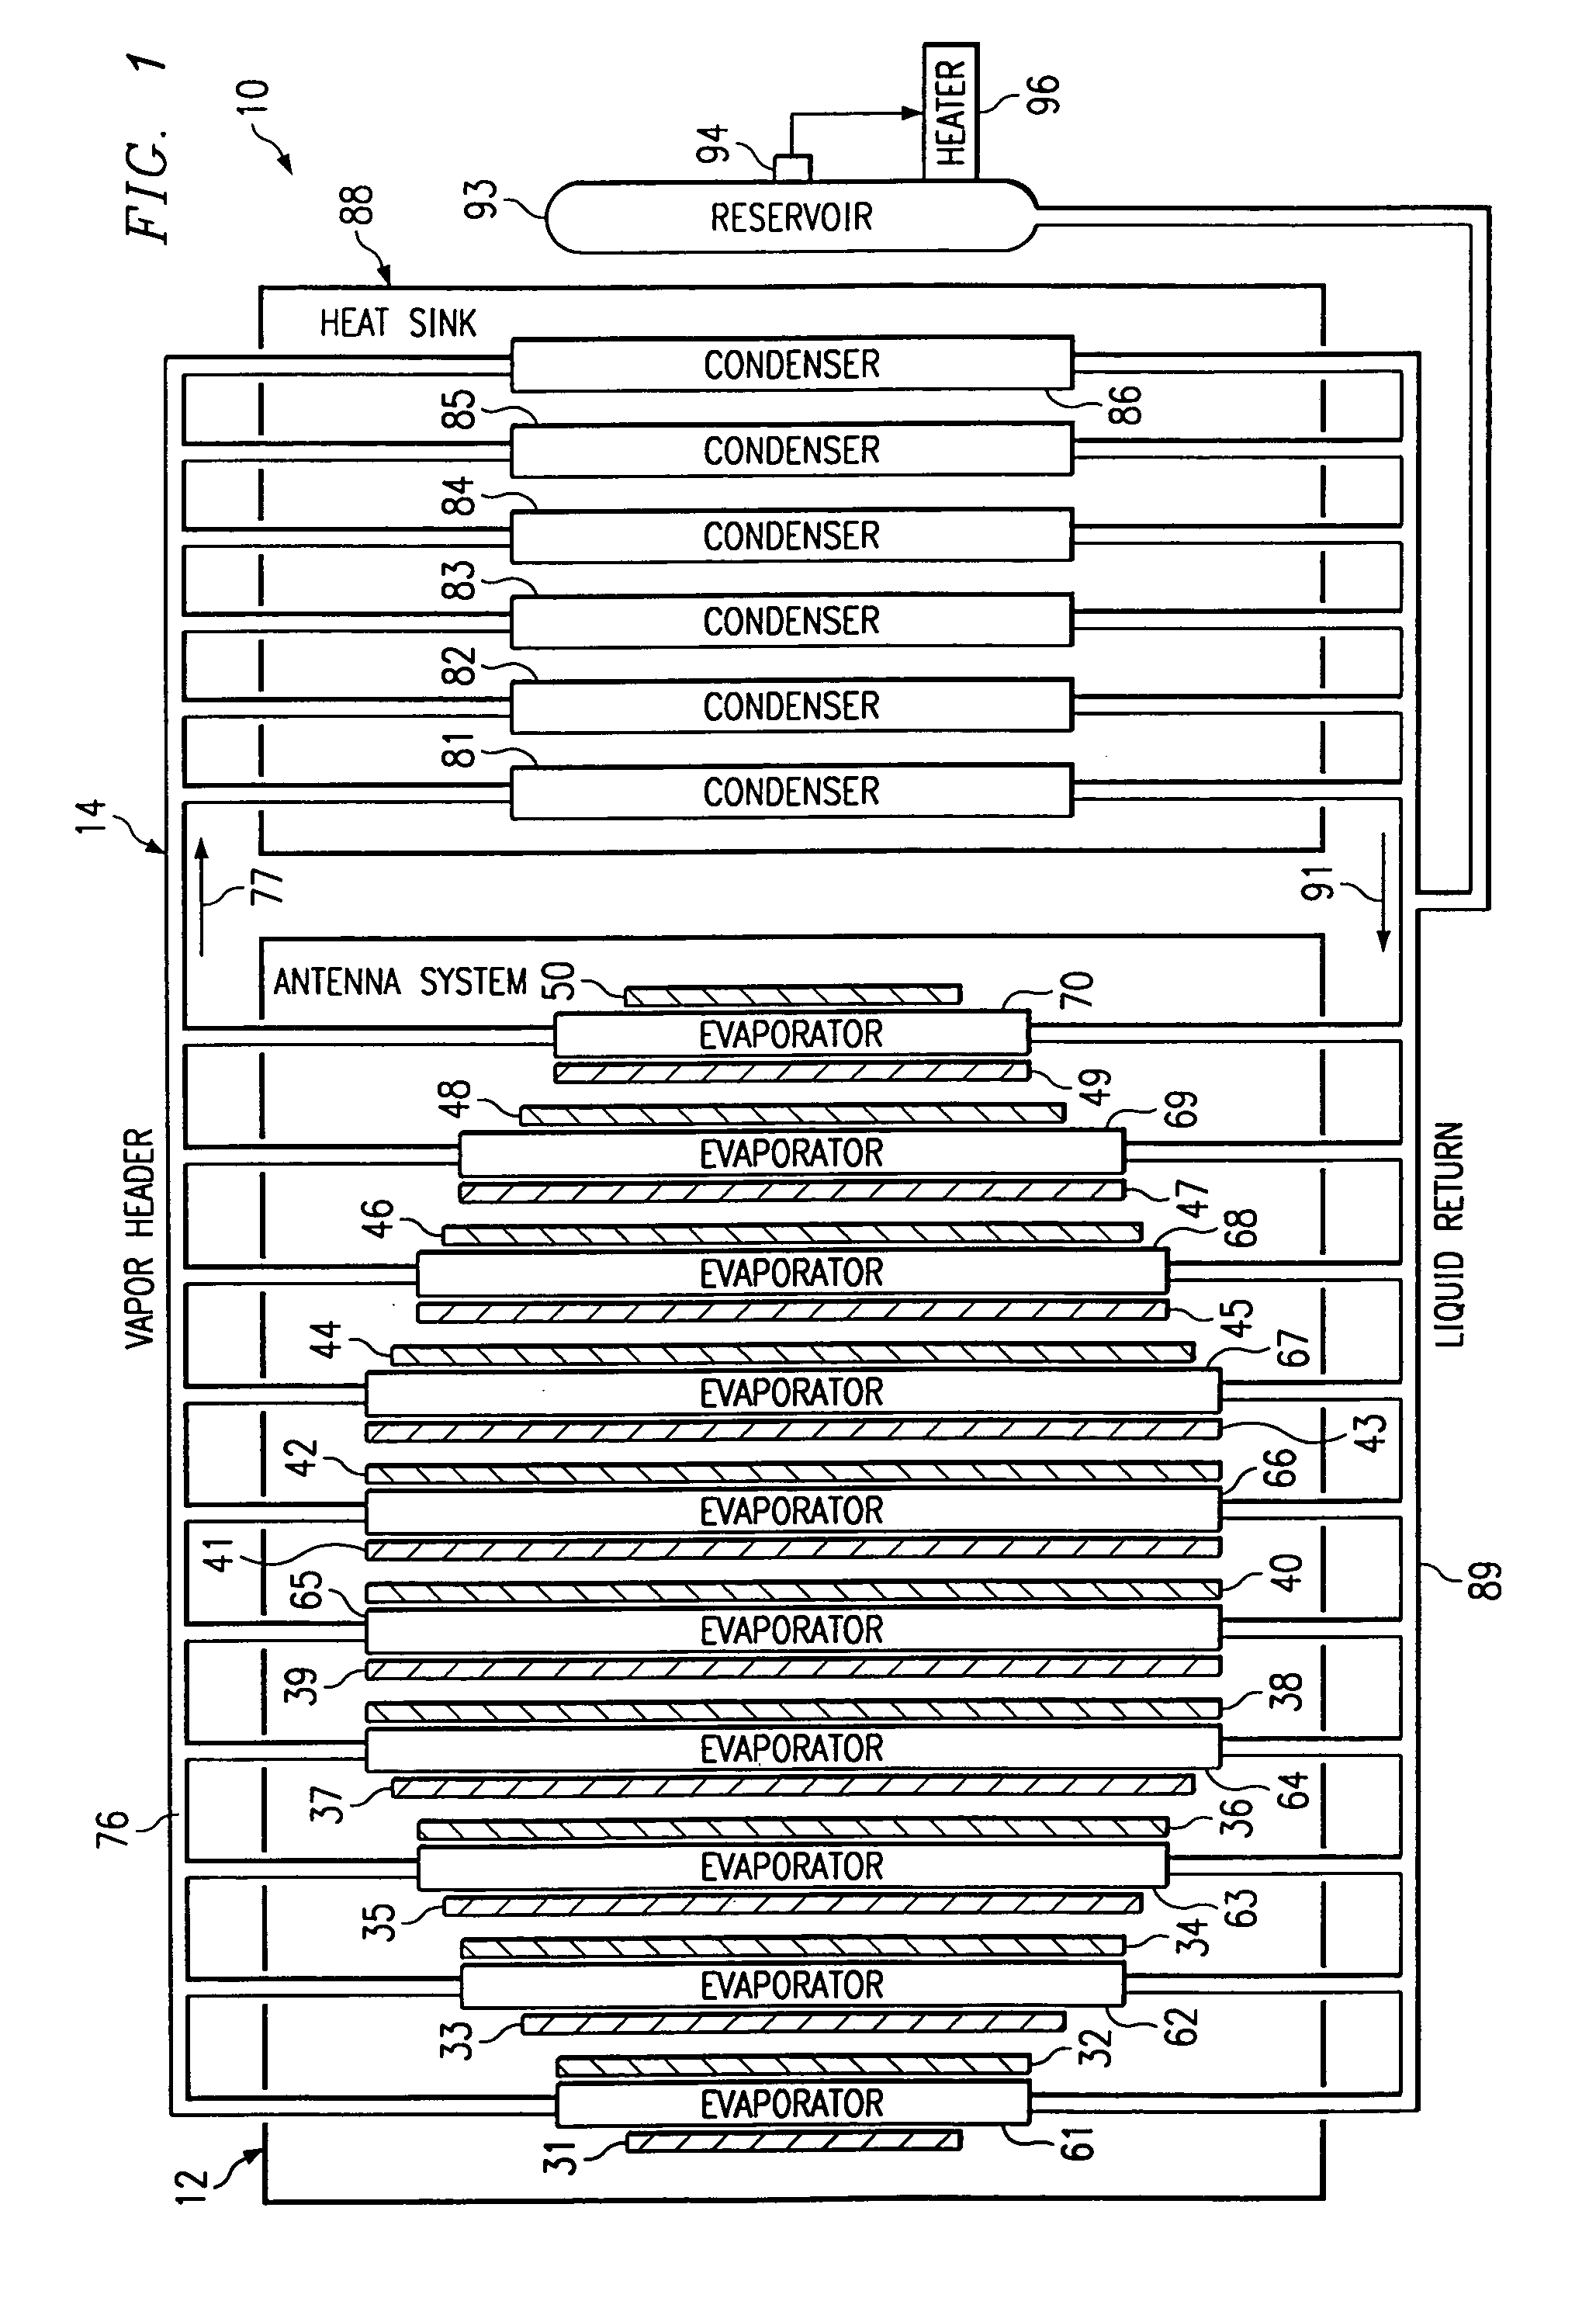 Method and apparatus for controlling temperature gradients within a structure being cooled